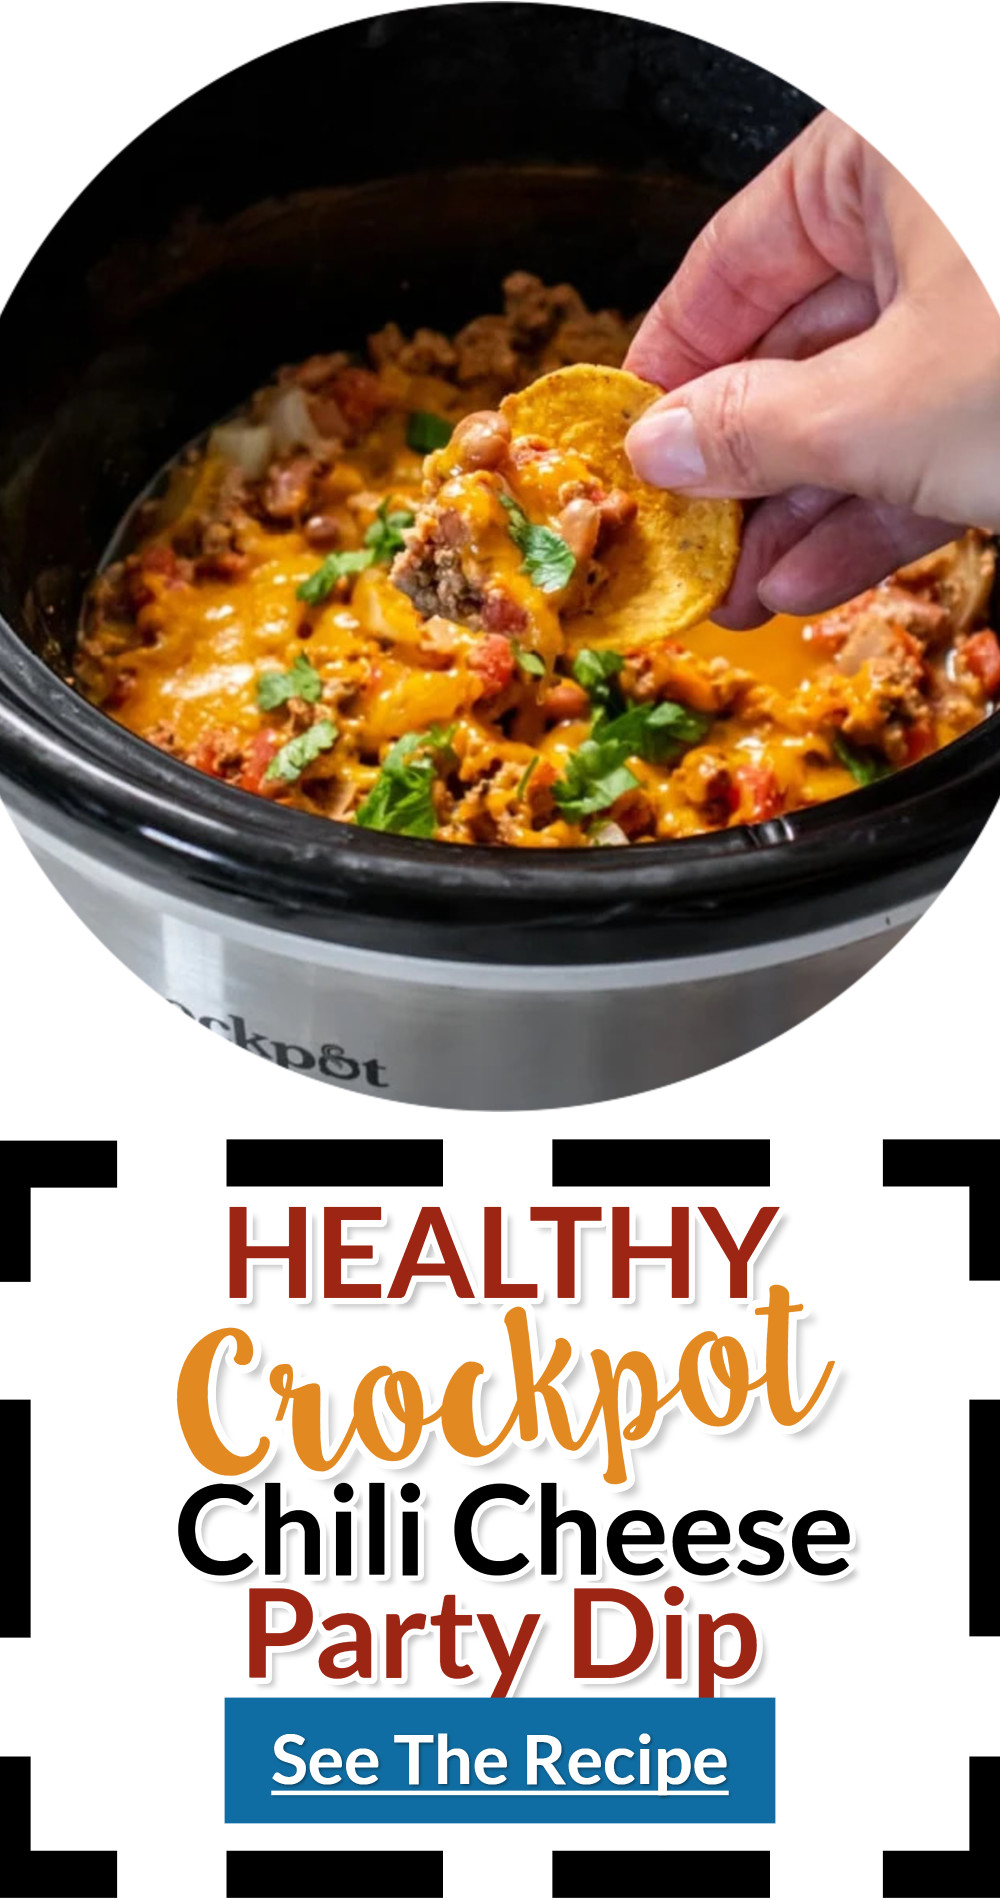 Healthy crockpot chili cheese party dip recipes easy snacks, small bites, finger foods and hot appetizers for a crowd